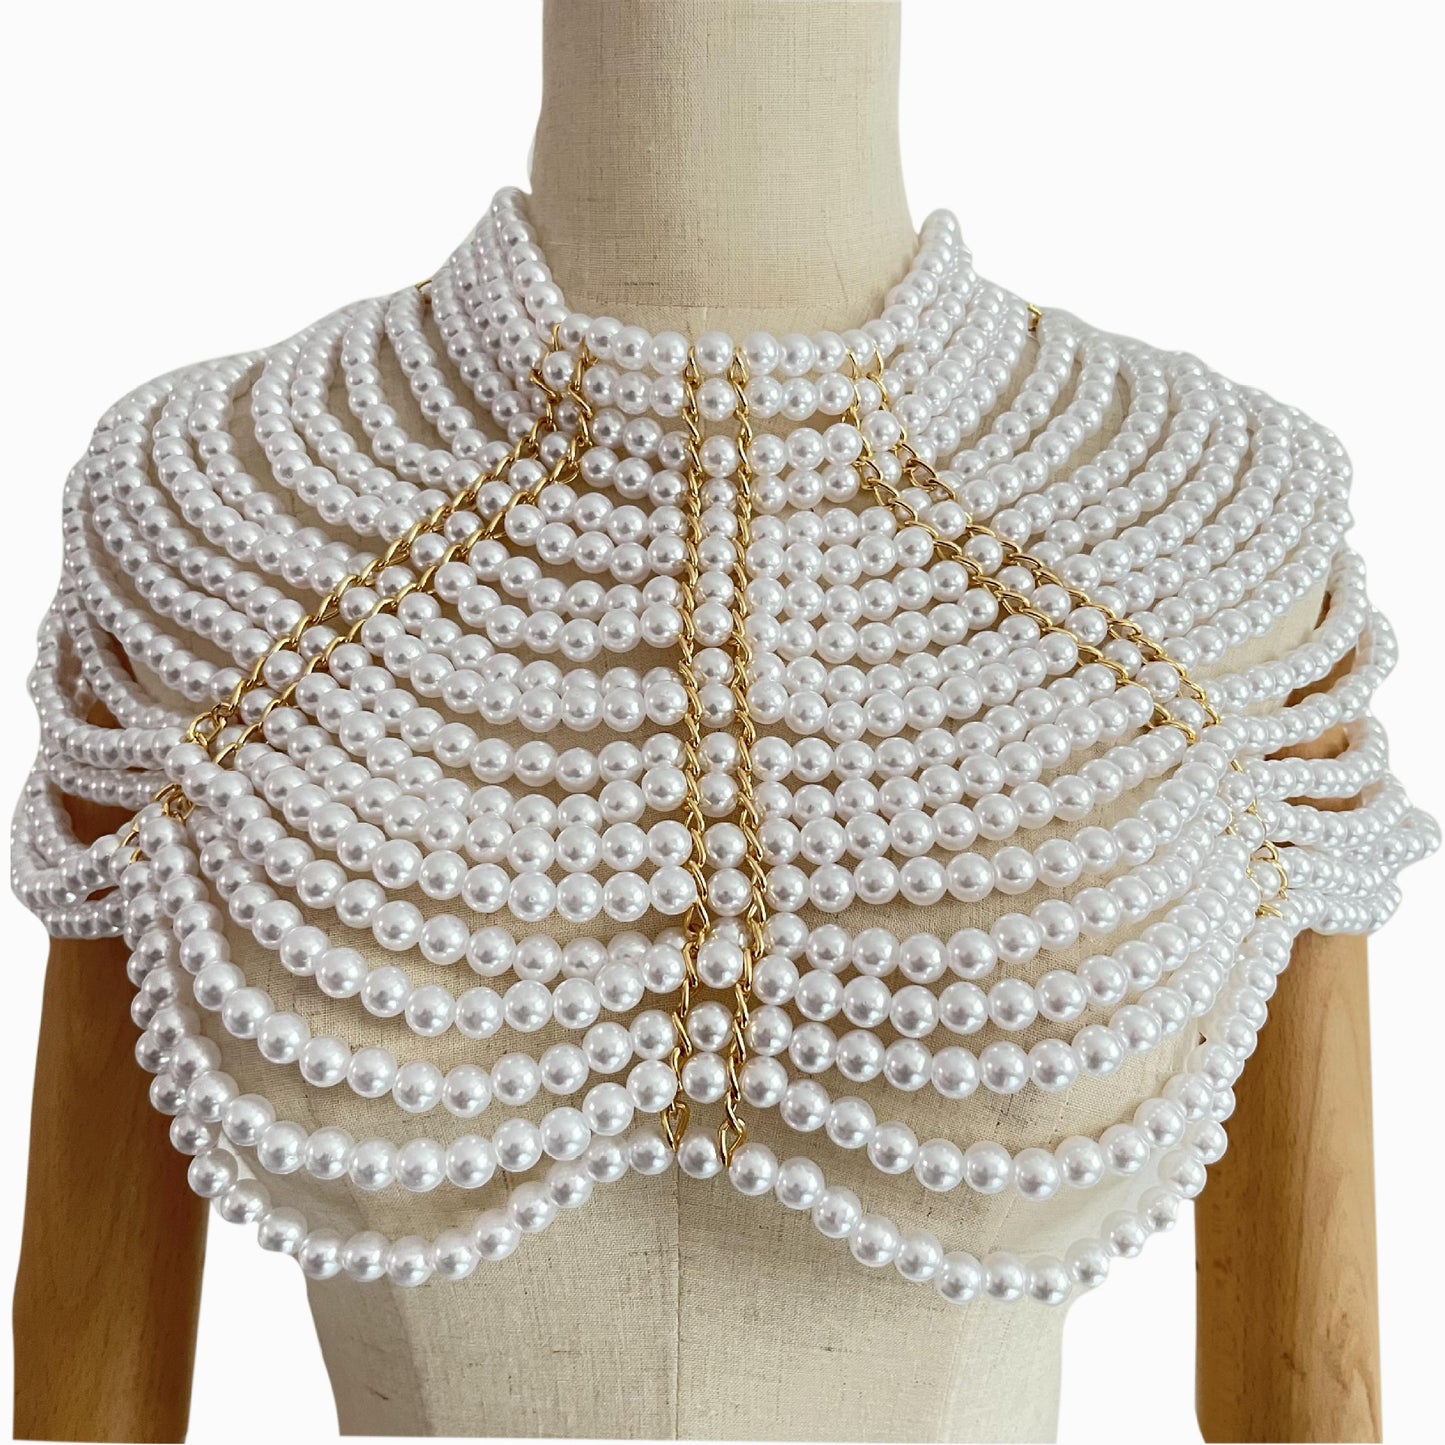 Pearl Body Cha Ornament Exaggerated Women Clothing Necklace Back Chain Metal Shoulder Chain